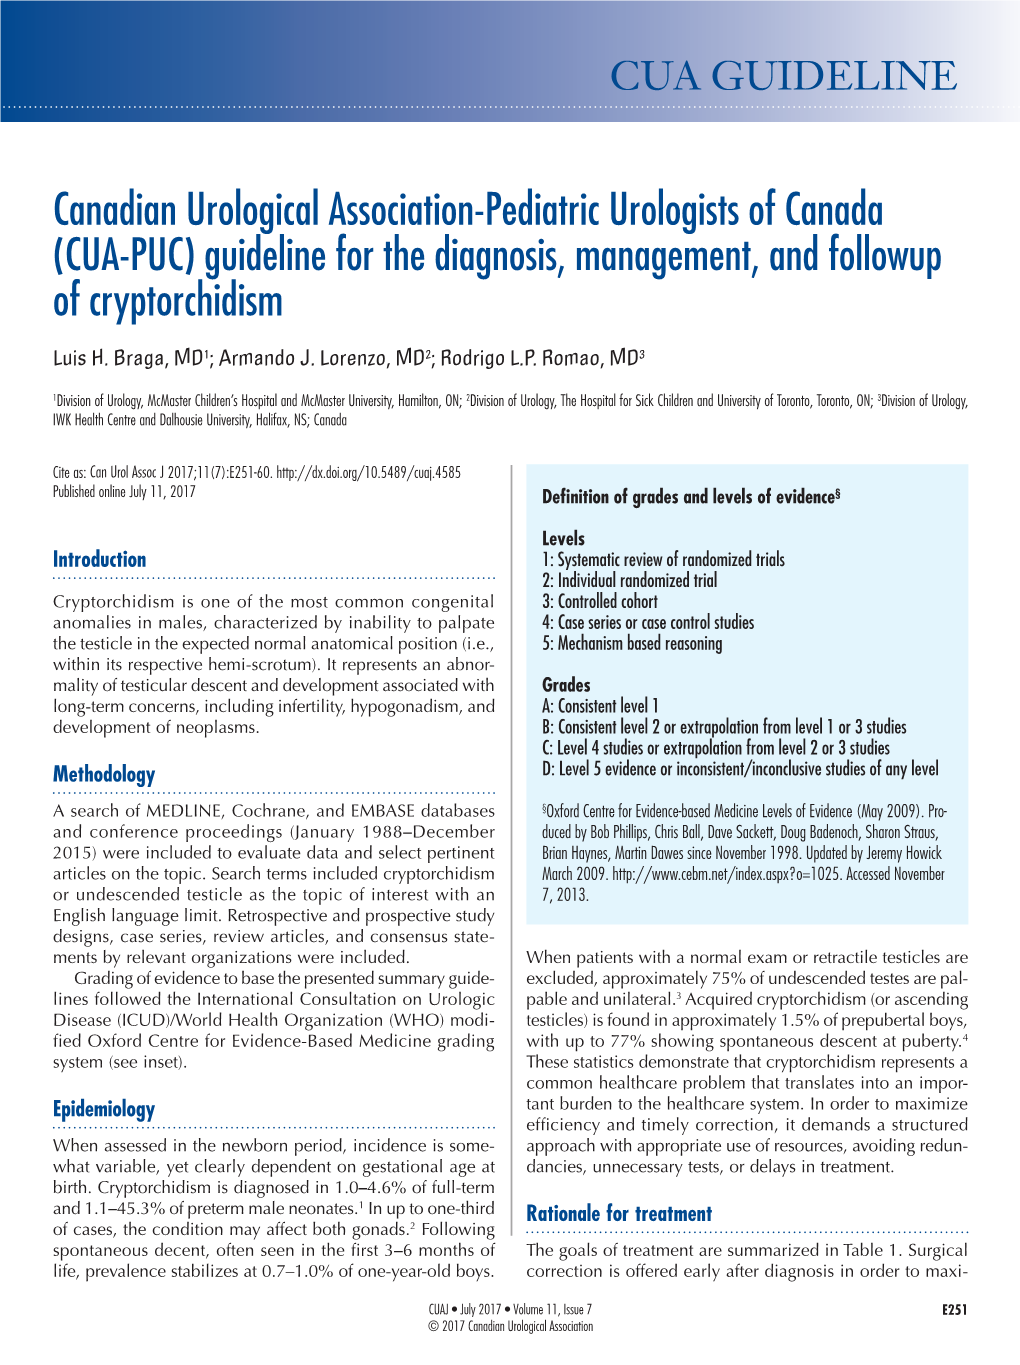 (CUA-PUC) Guideline for the Diagnosis, Management, and Followup of Cryptorchidism